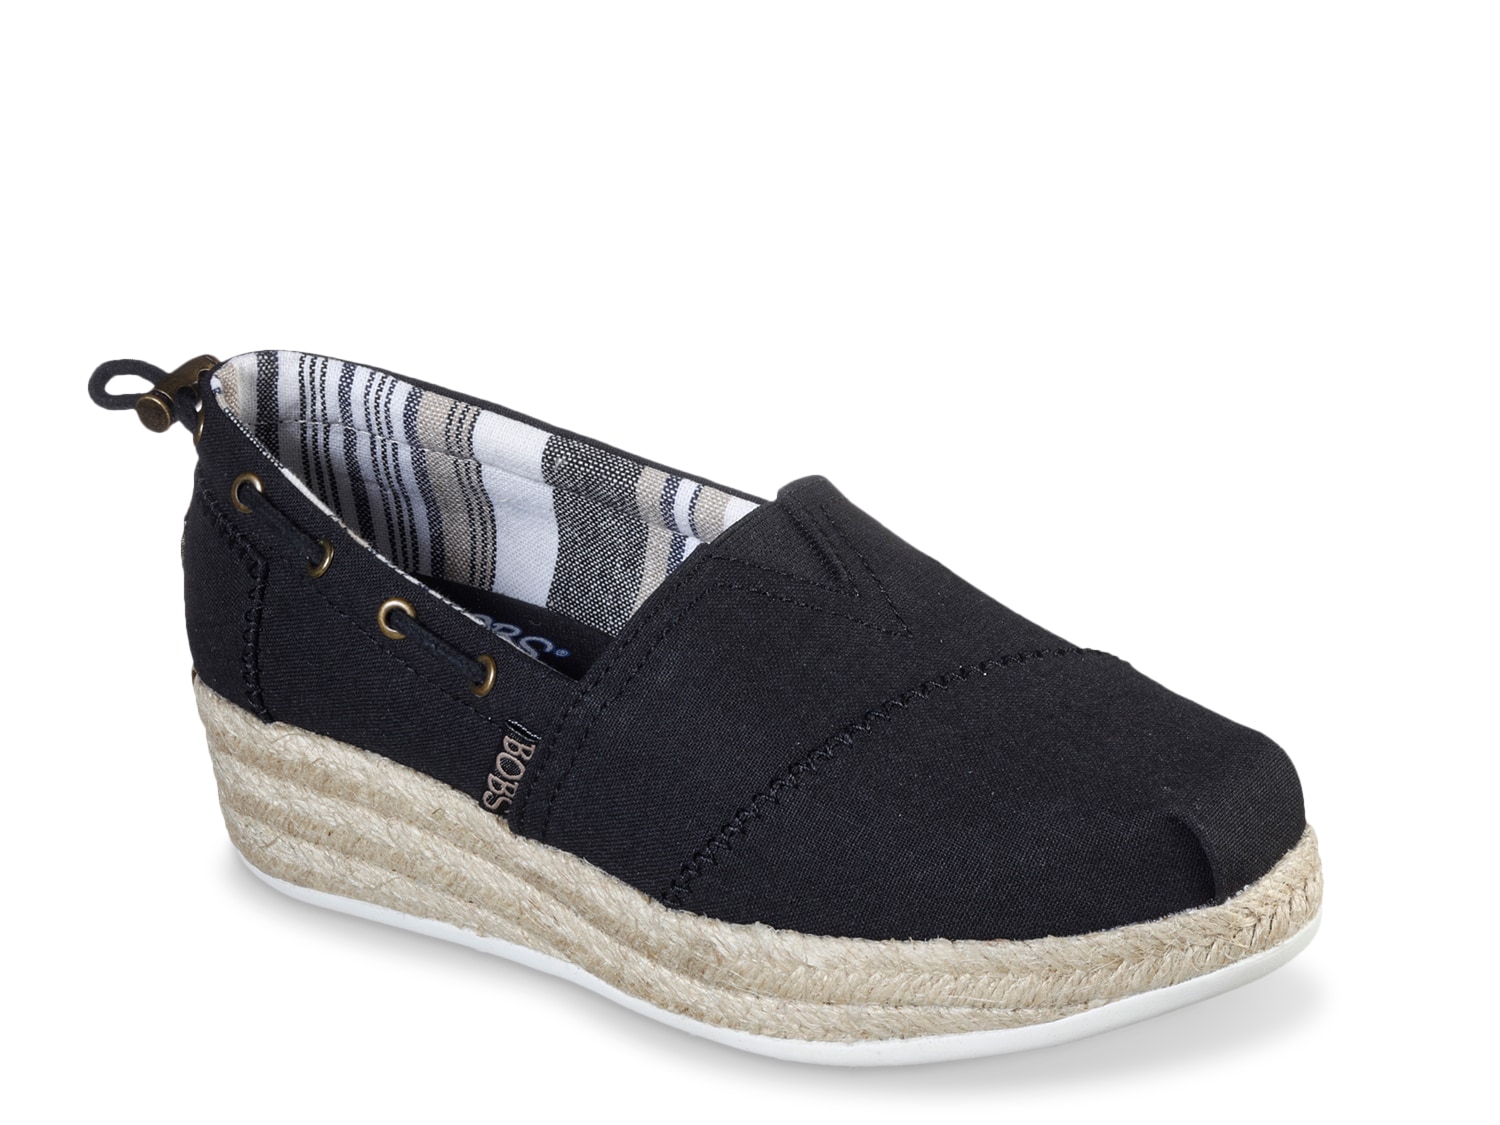 skechers bobs highlights women's wedge shoes